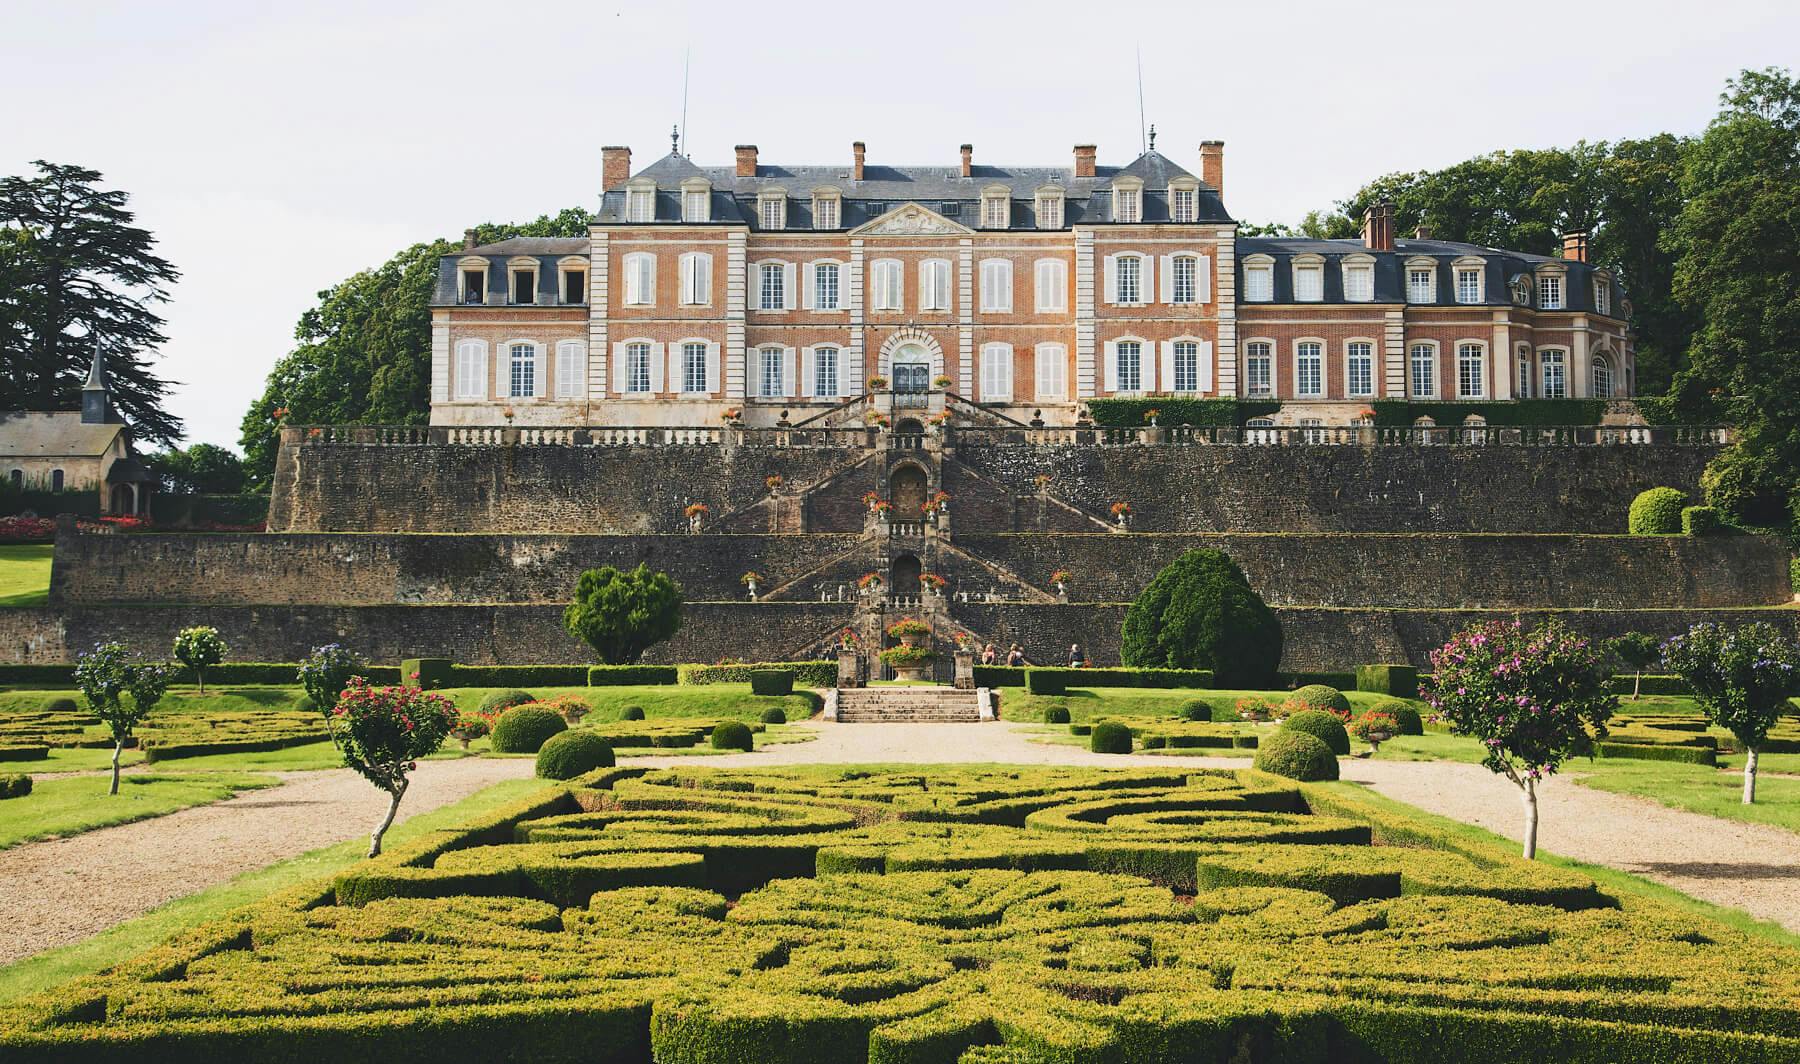 Stately chateau with garden and gates